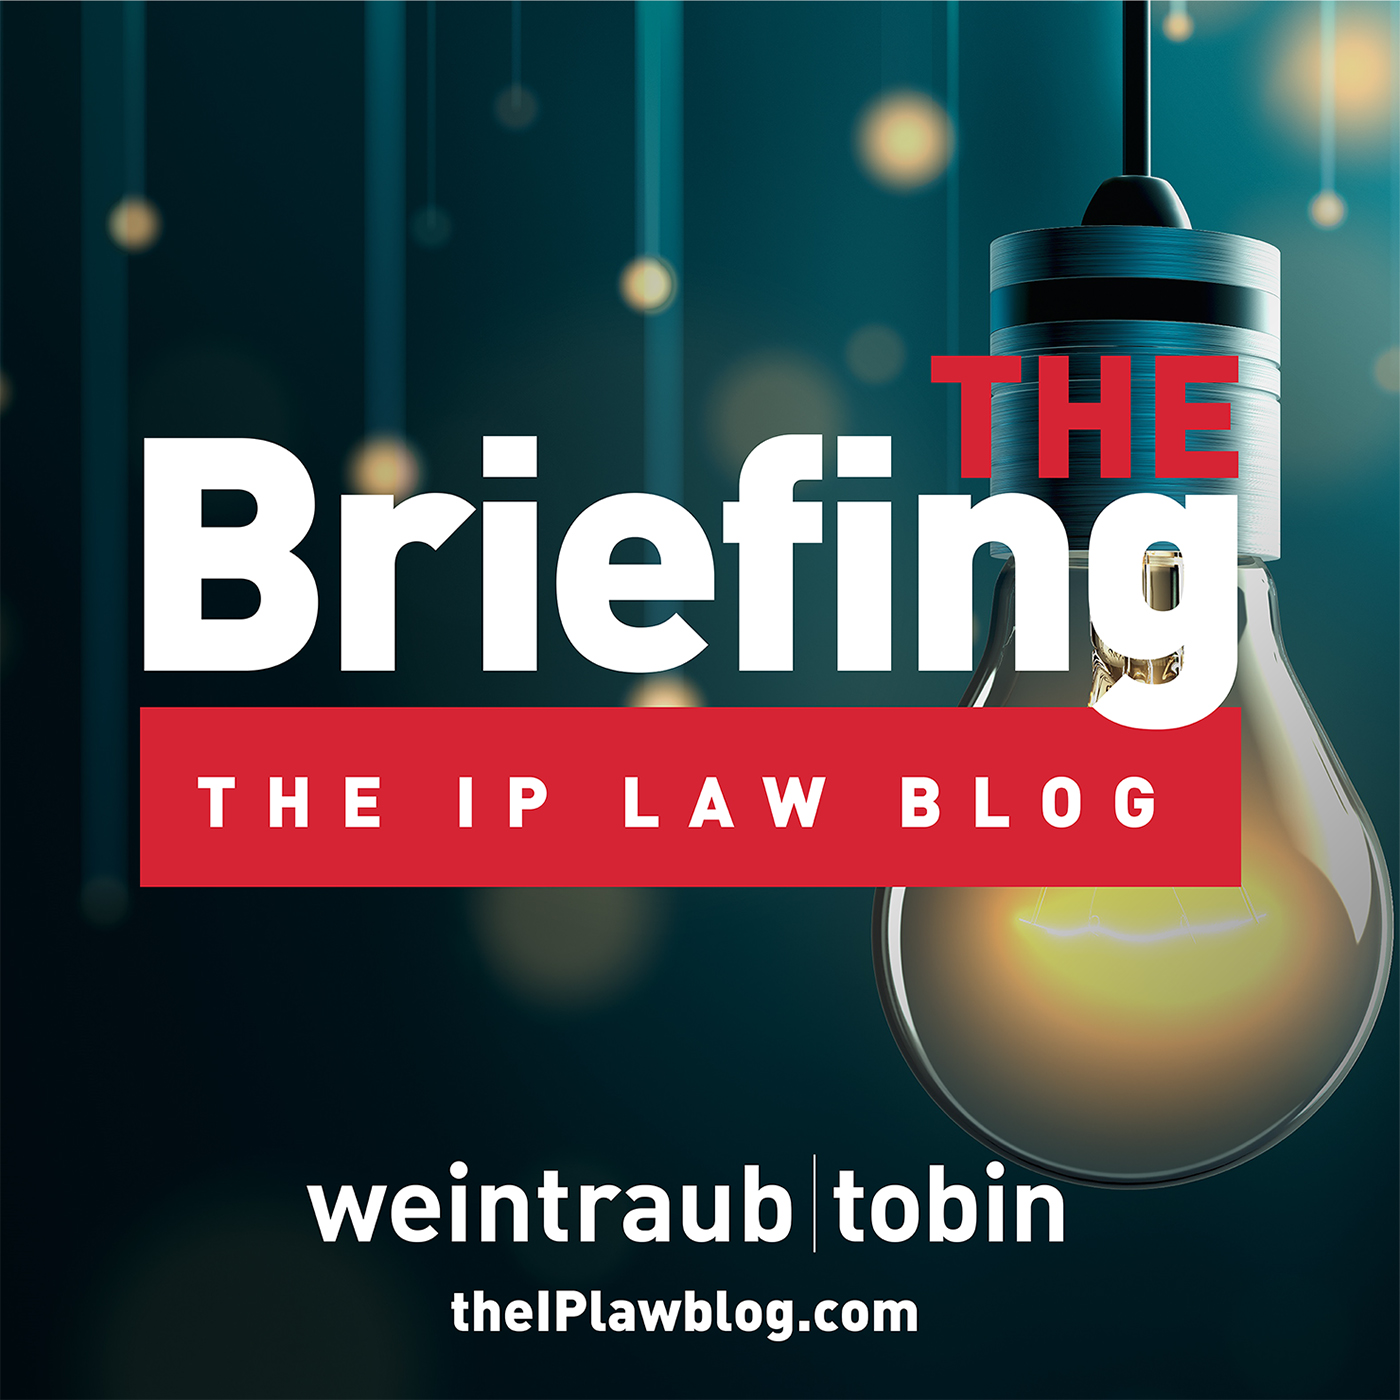 The Briefing by the IP Law Blog